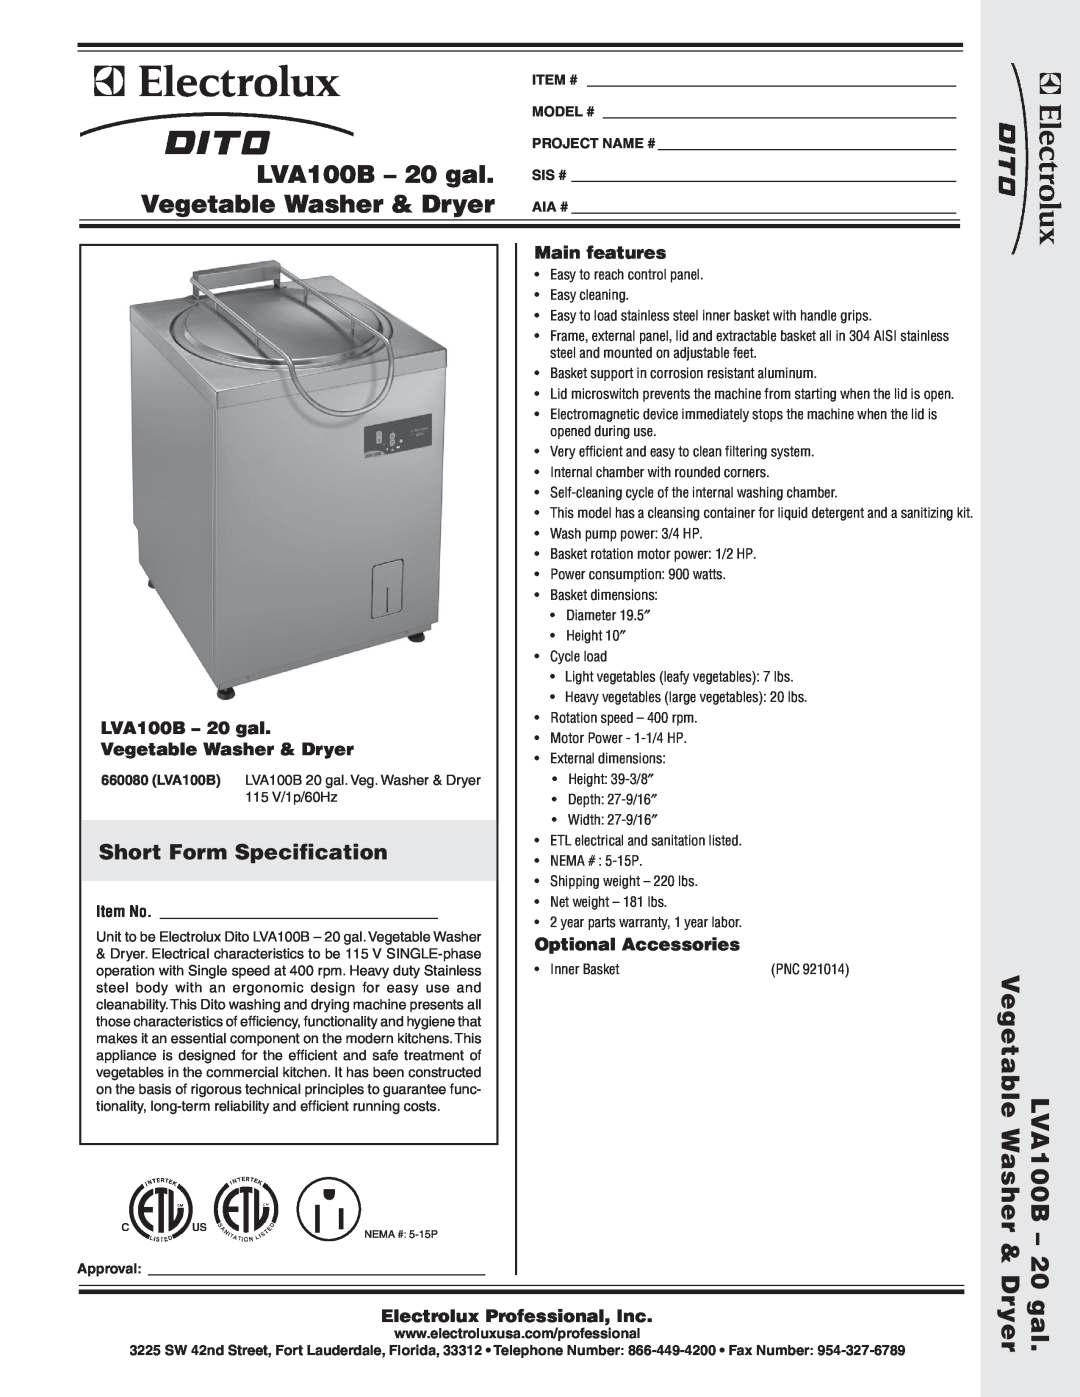 Electrolux dimensions Short Form Specification, Main features, LVA100B - 20 gal, Vegetable Washer & Dryer, Item No 